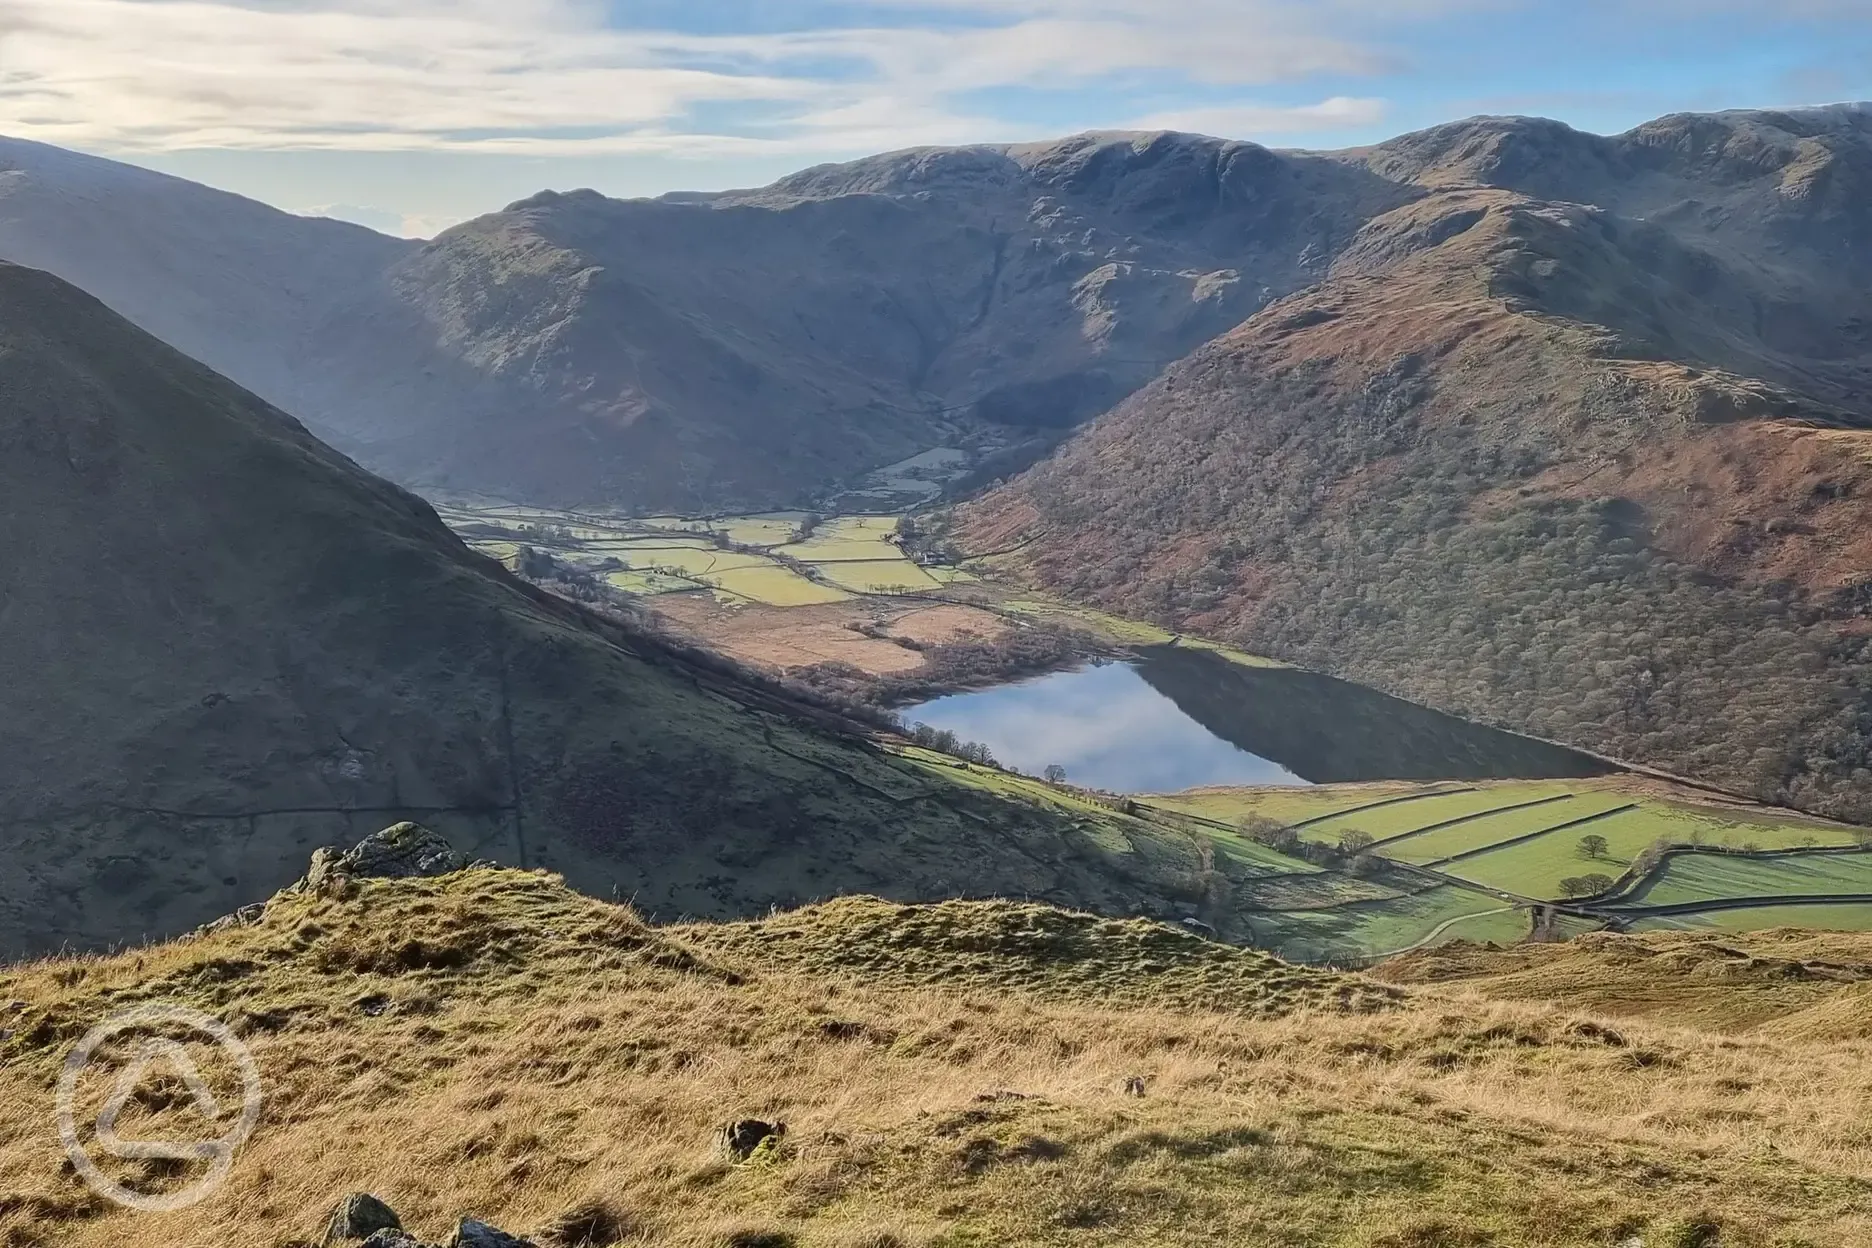 View of Brotherswater and the site from nearby walk